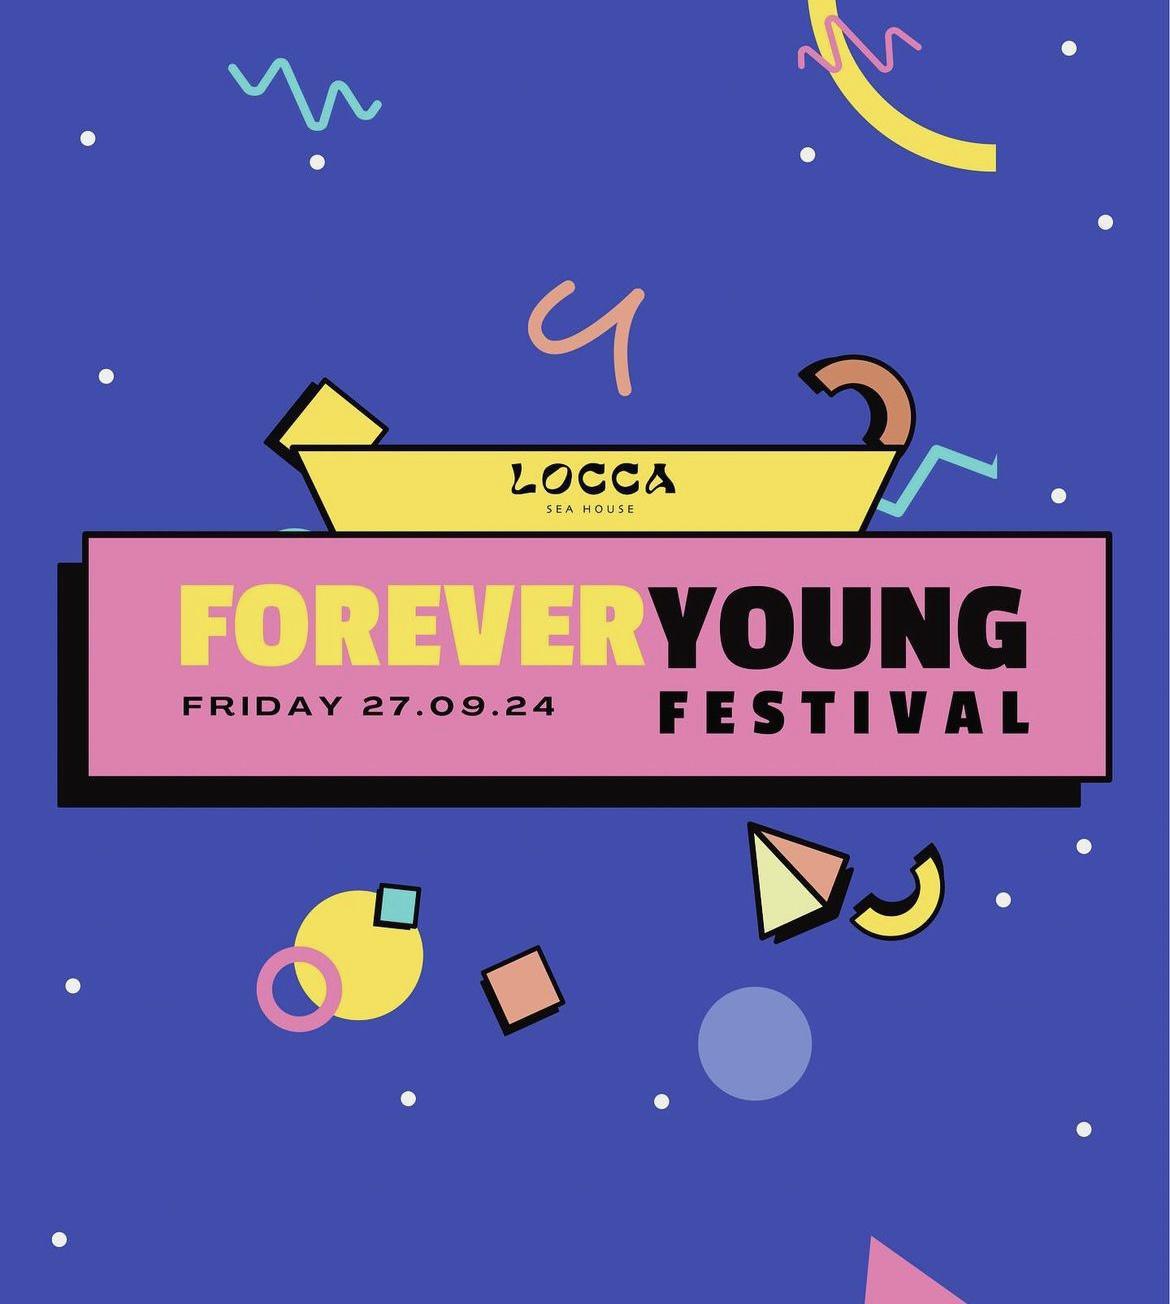 Forever Young Festival at Locca Sea House